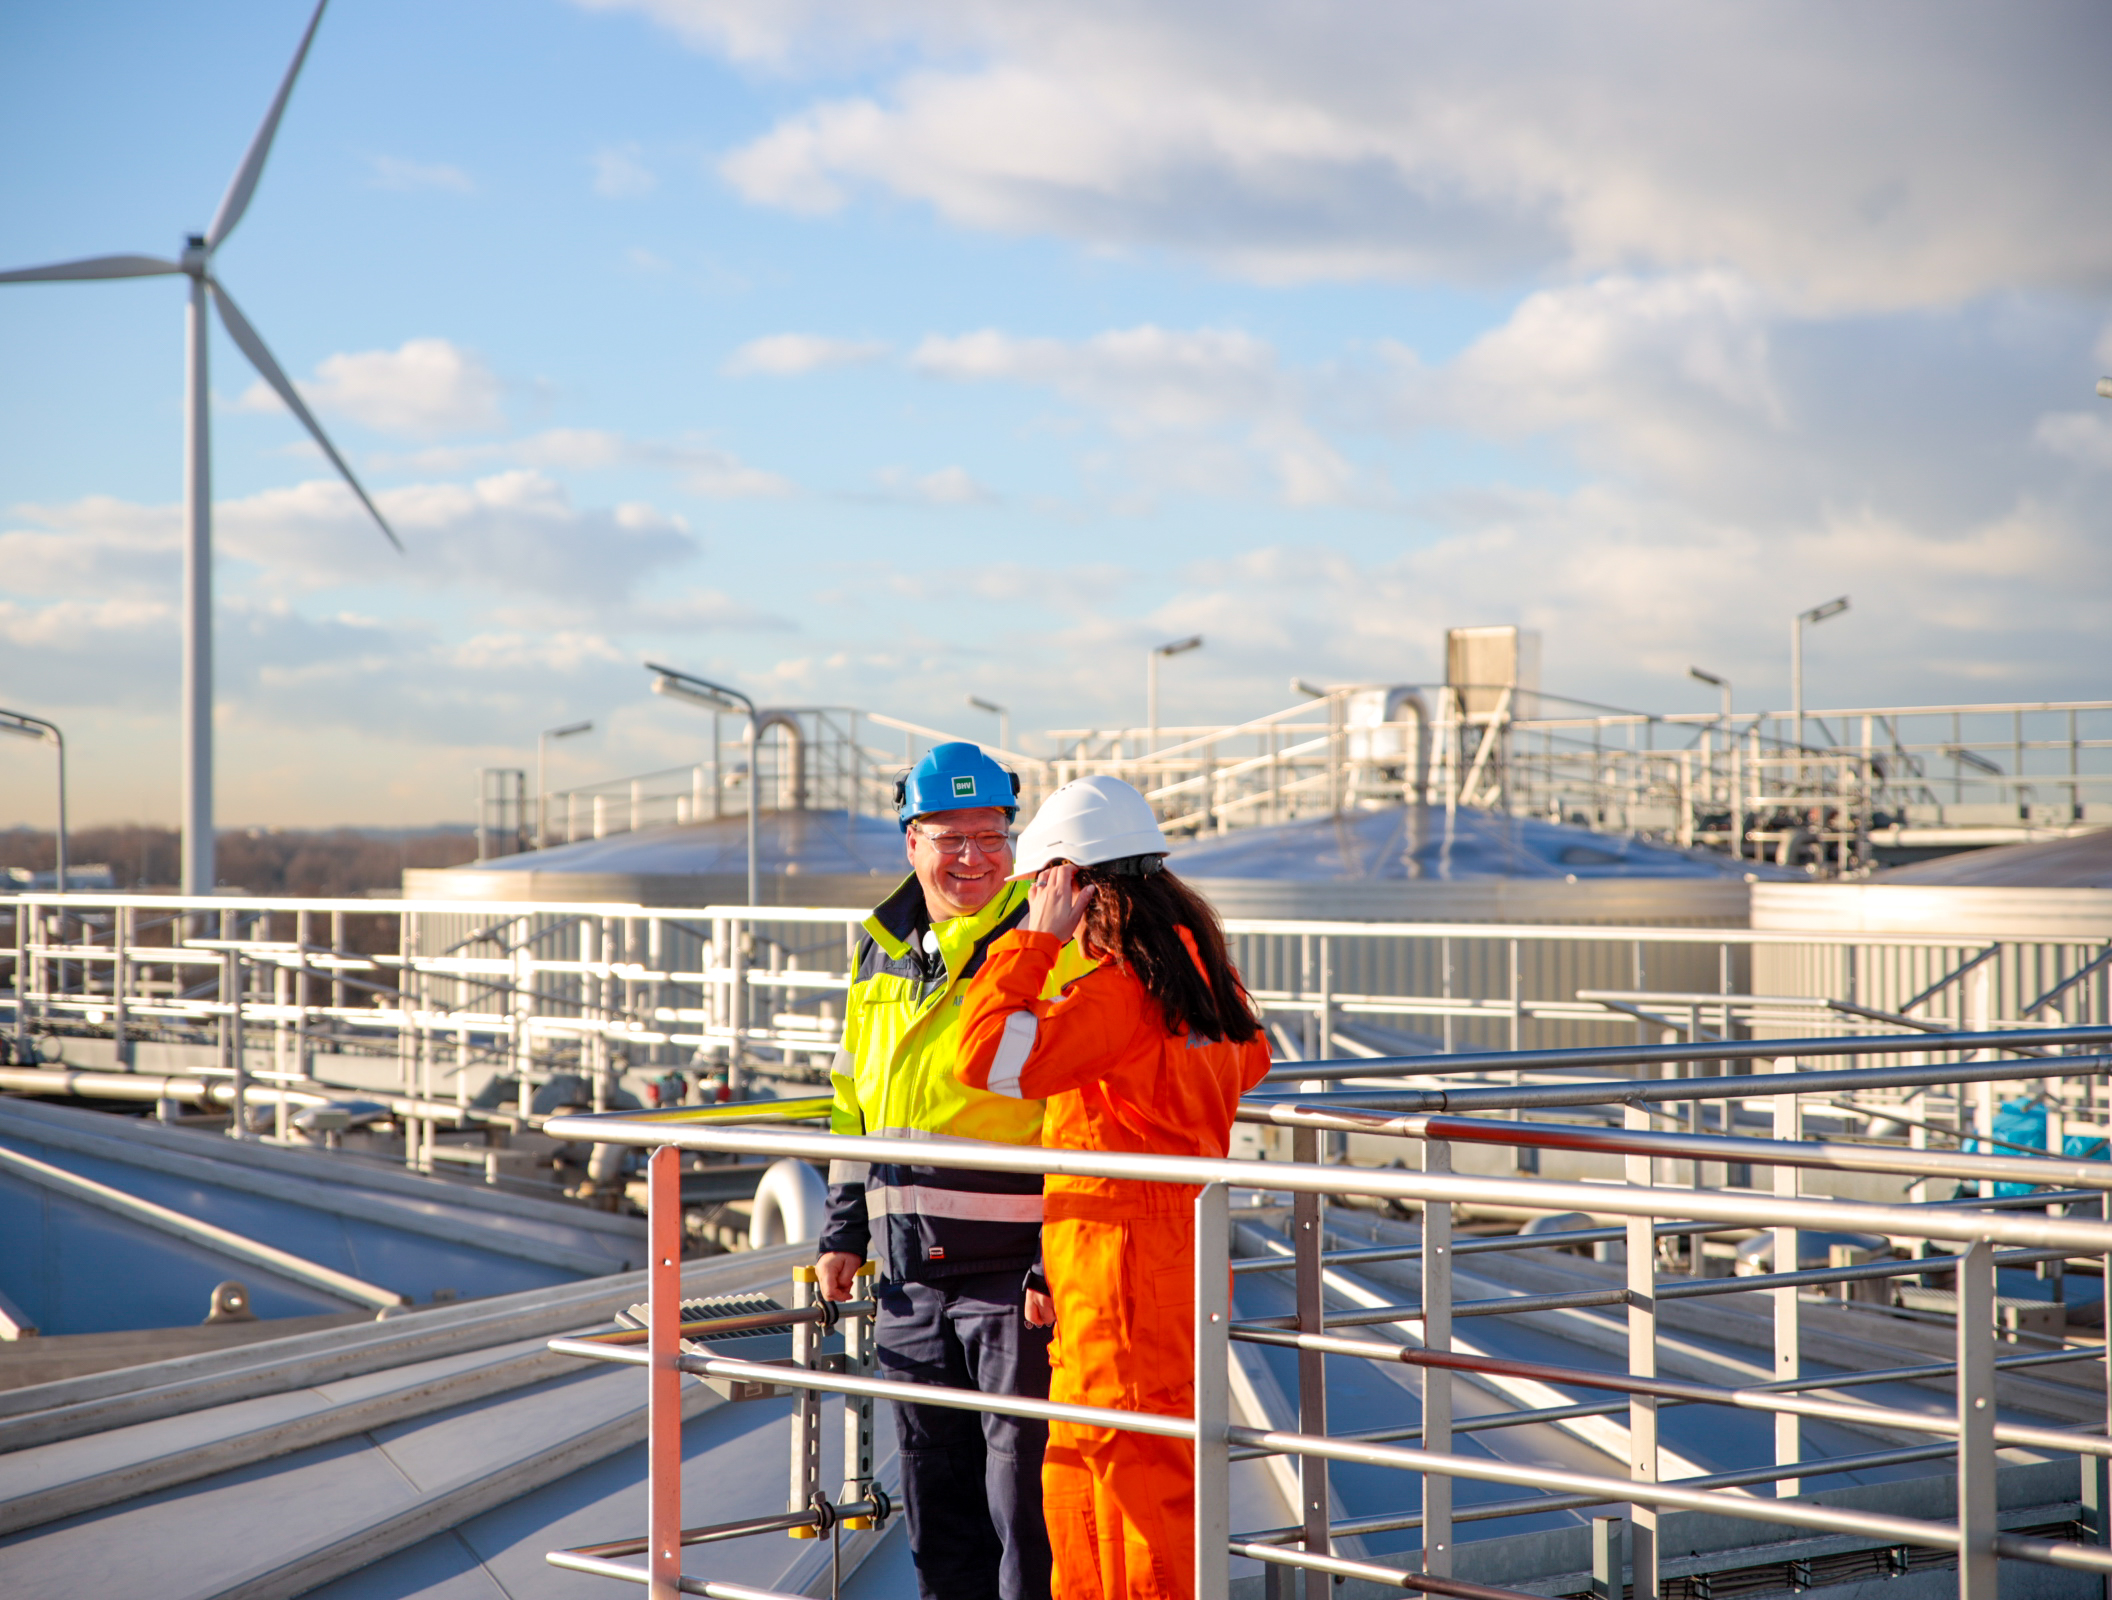 2 employees in high-visibility jackets and hardhats talking while in a biofuel plant